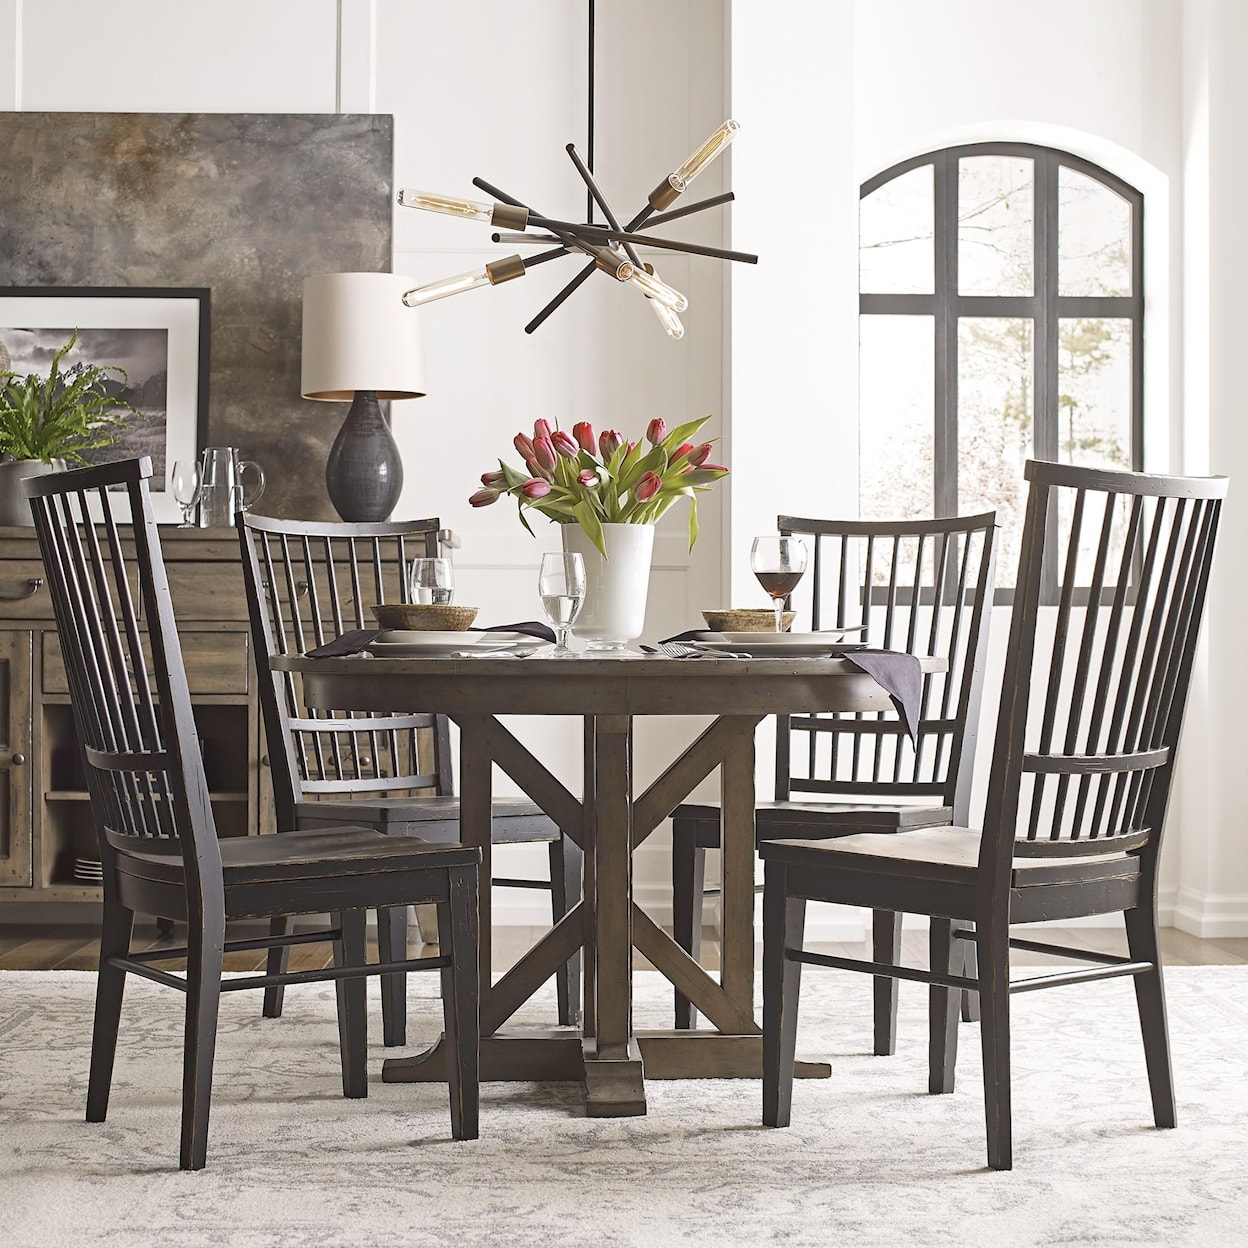 Kincaid Furniture Mill House Dining Table Set with 4 Chairs